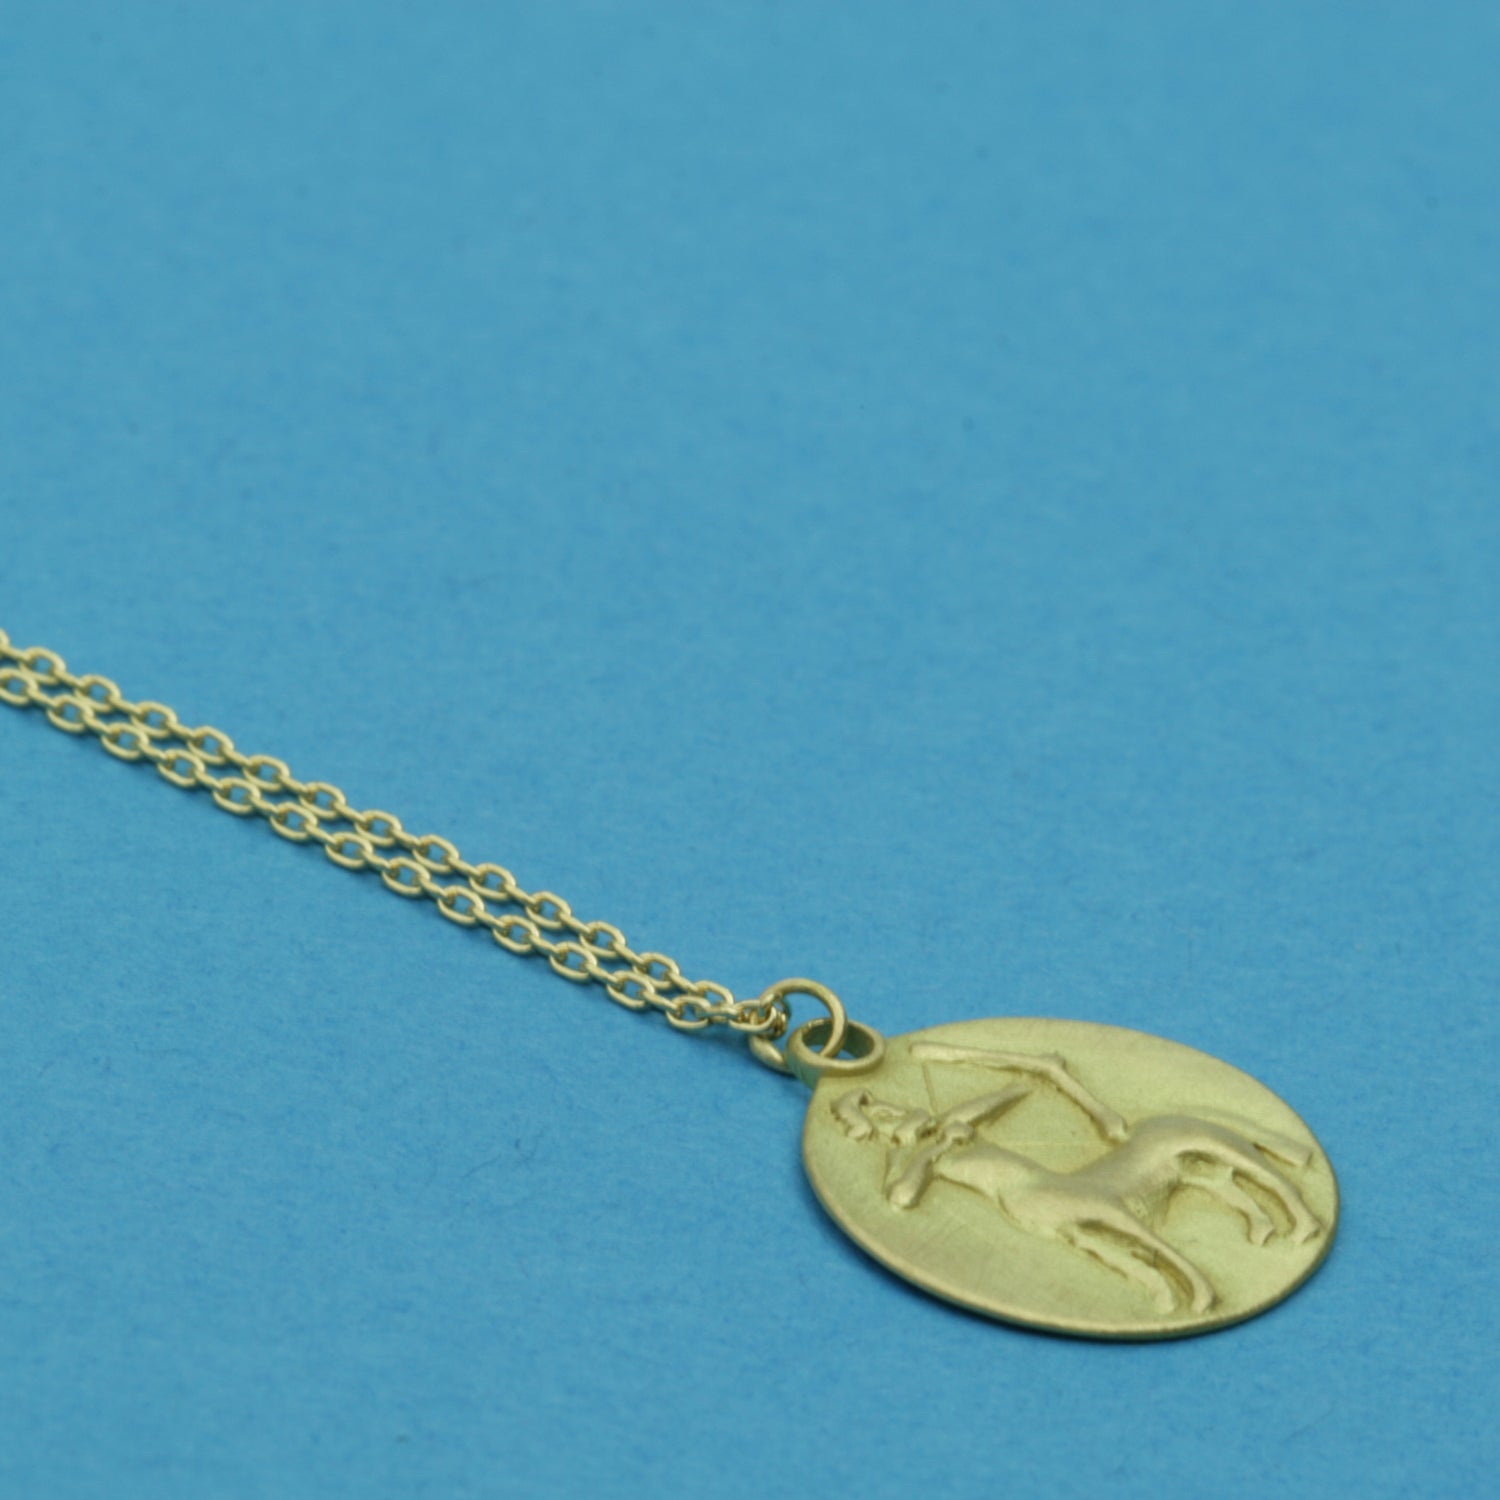 Sagittarius Medal on cable chain, side view